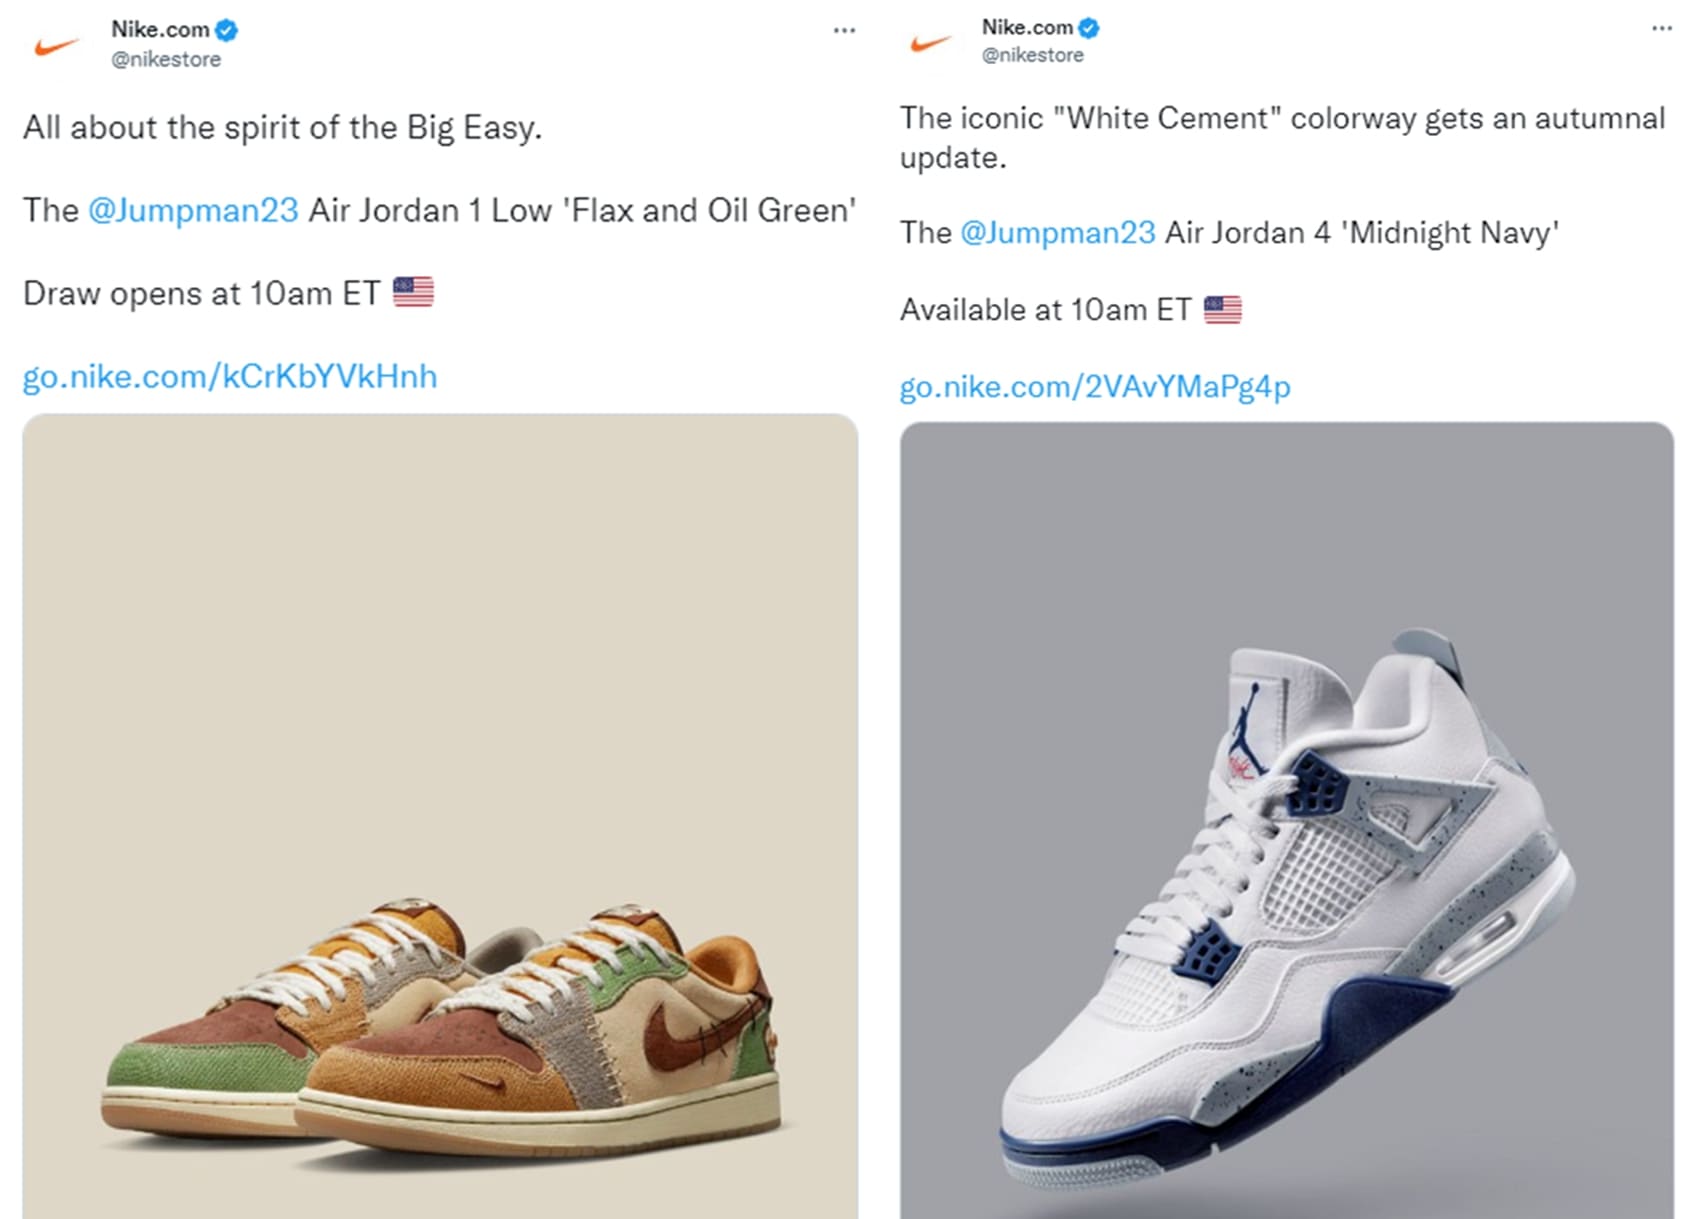 Two Nike Tweets announcing new sneaker drops